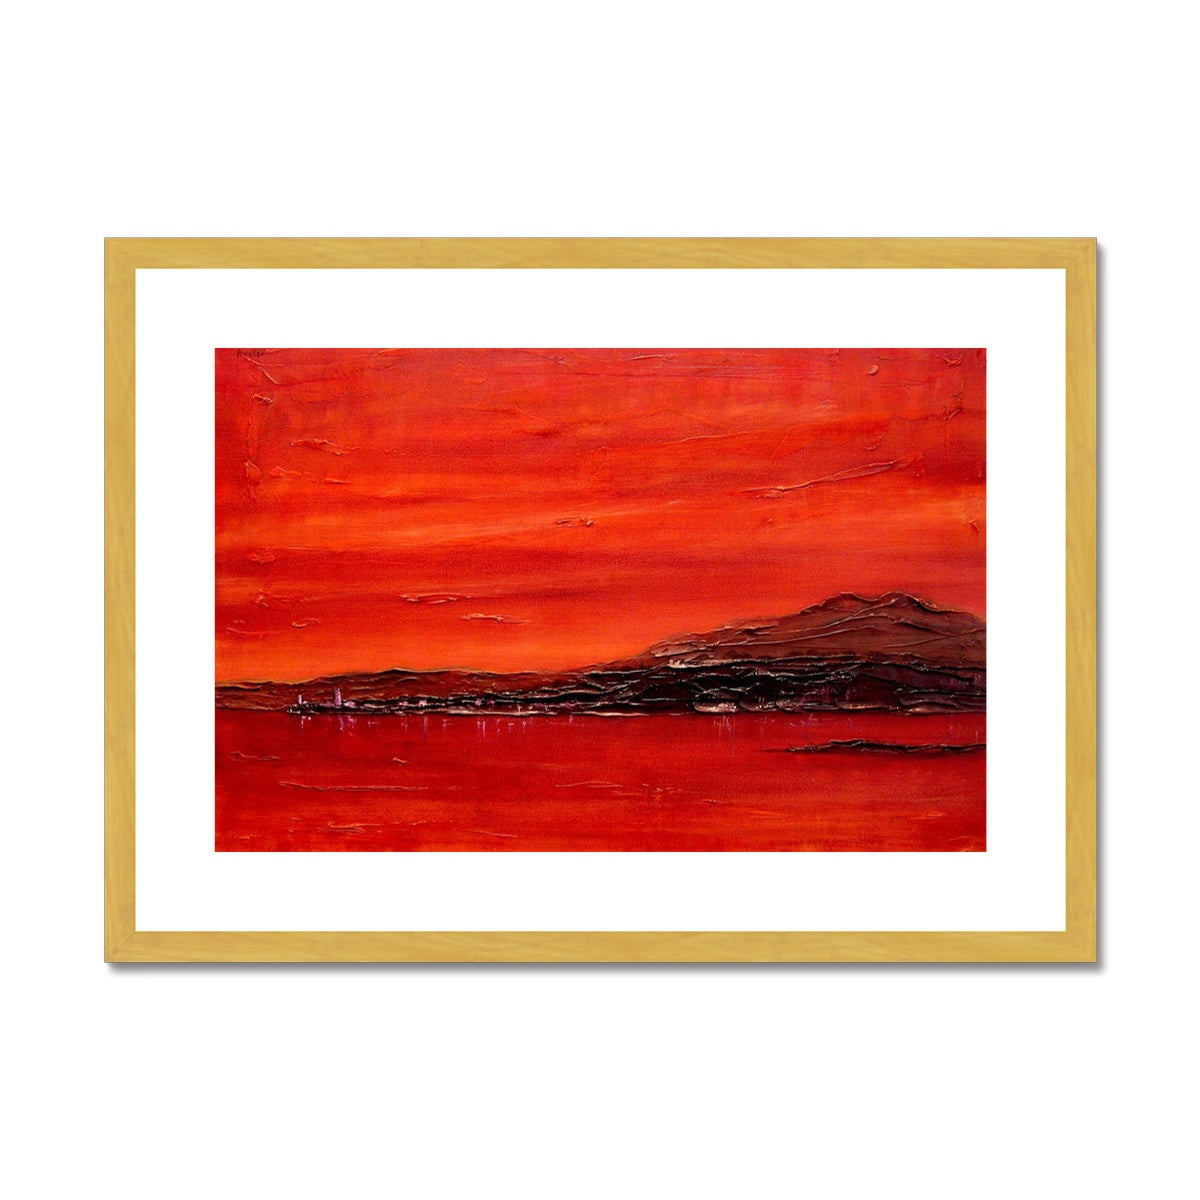 Toward Point Lighthouse Sunset Painting | Antique Framed & Mounted Prints From Scotland-Antique Framed & Mounted Prints-Arran Art Gallery-A2 Landscape-Gold Frame-Paintings, Prints, Homeware, Art Gifts From Scotland By Scottish Artist Kevin Hunter